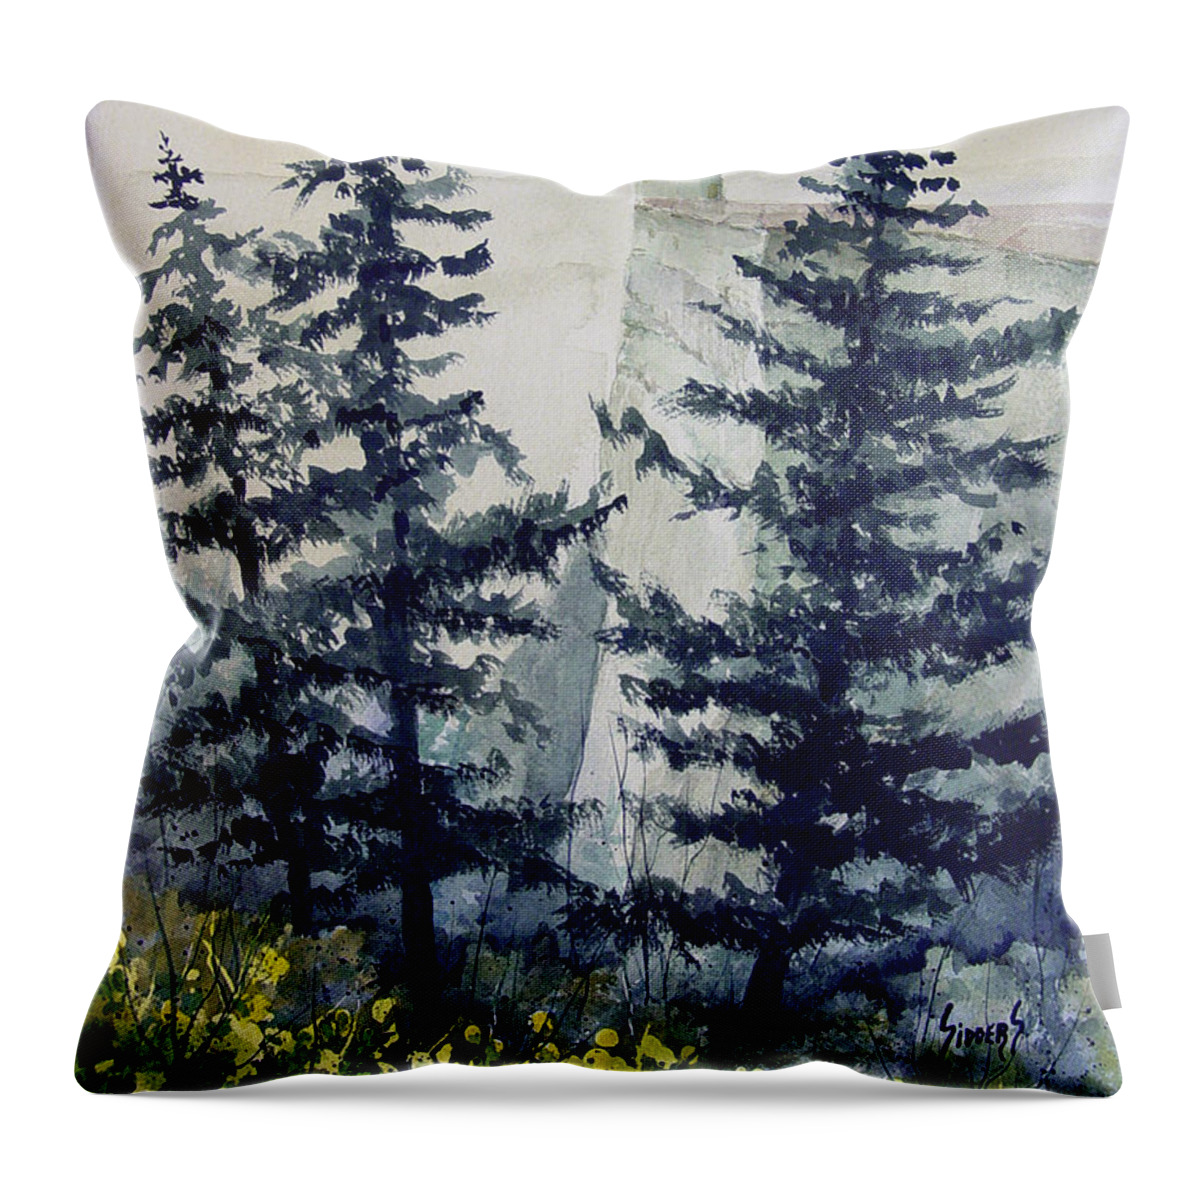 Wall Throw Pillow featuring the painting City Wall by Sam Sidders